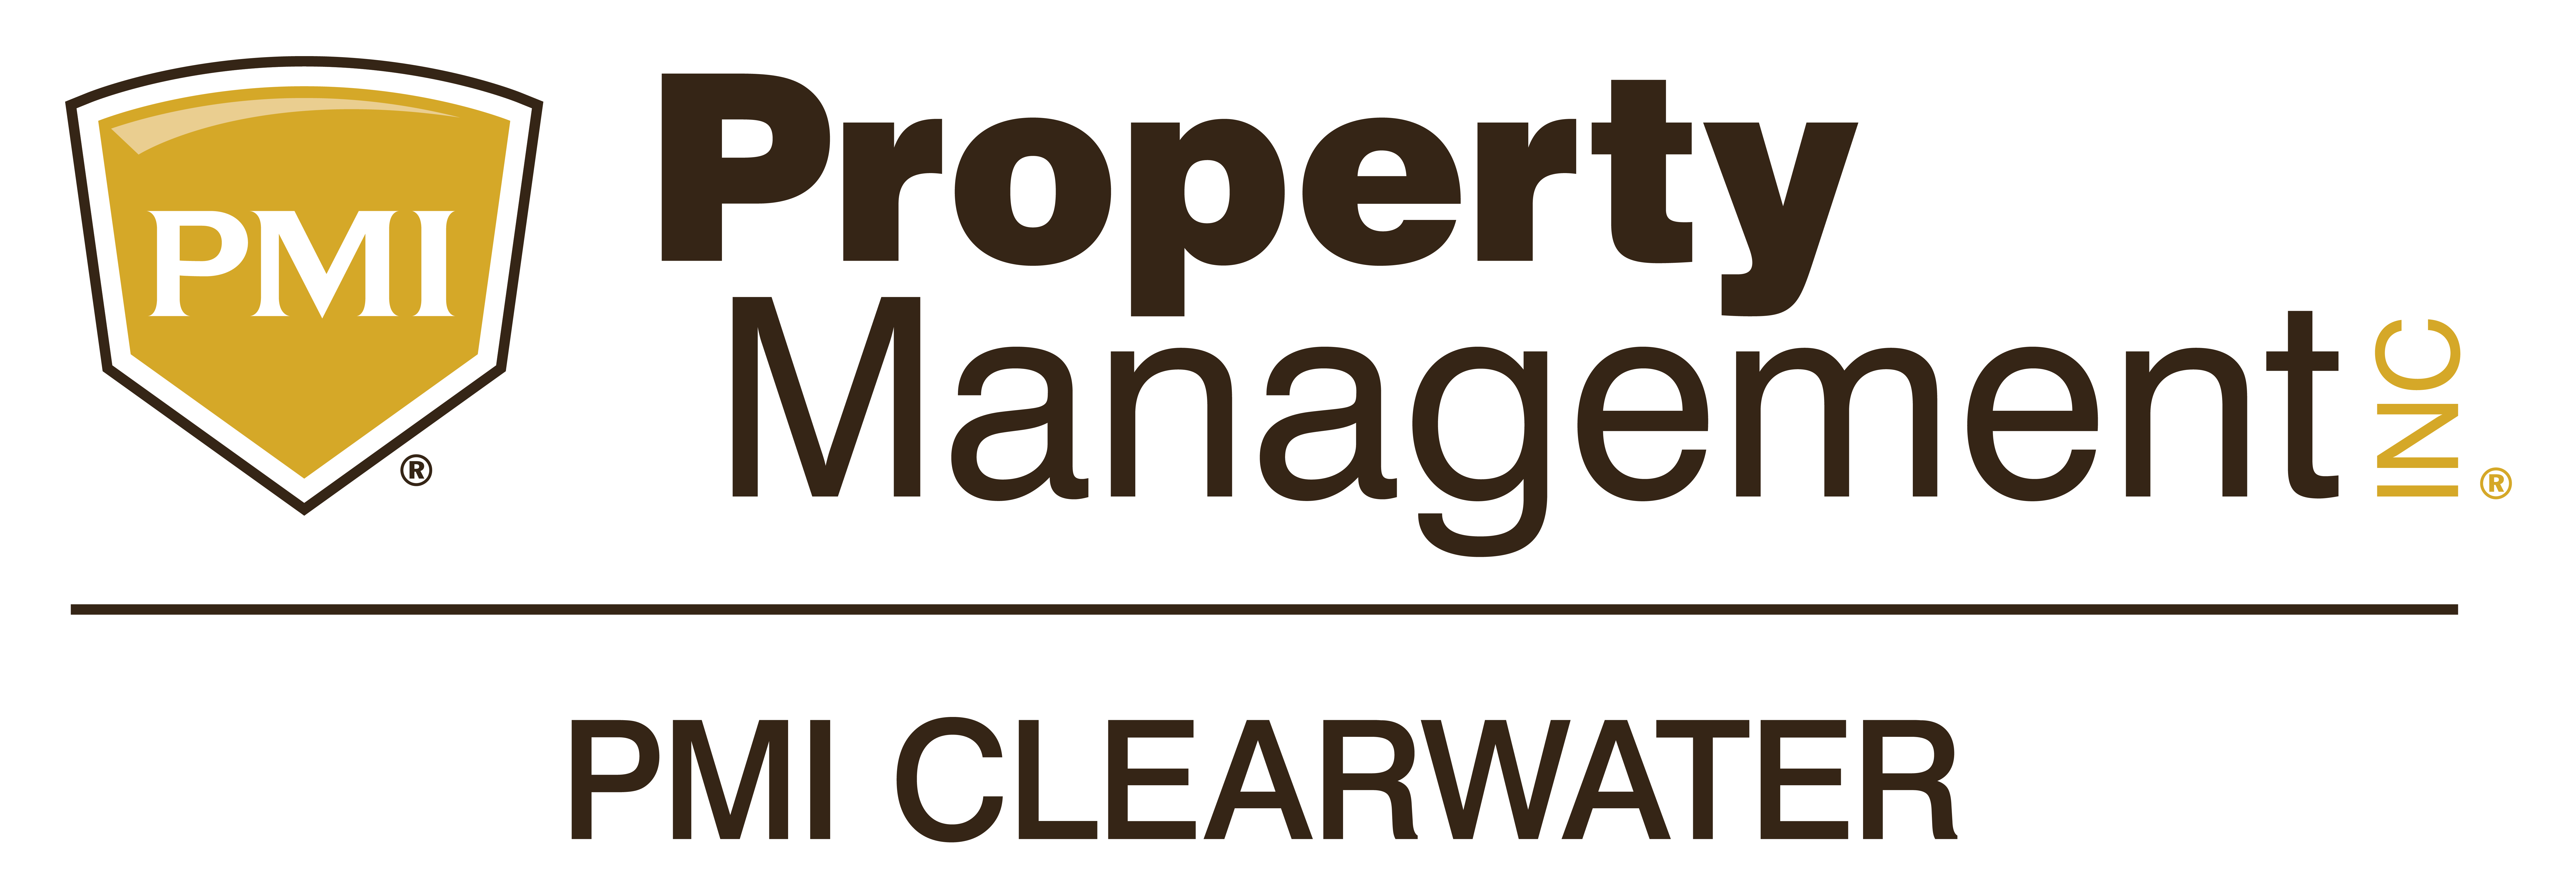 PMI Clearwater logo